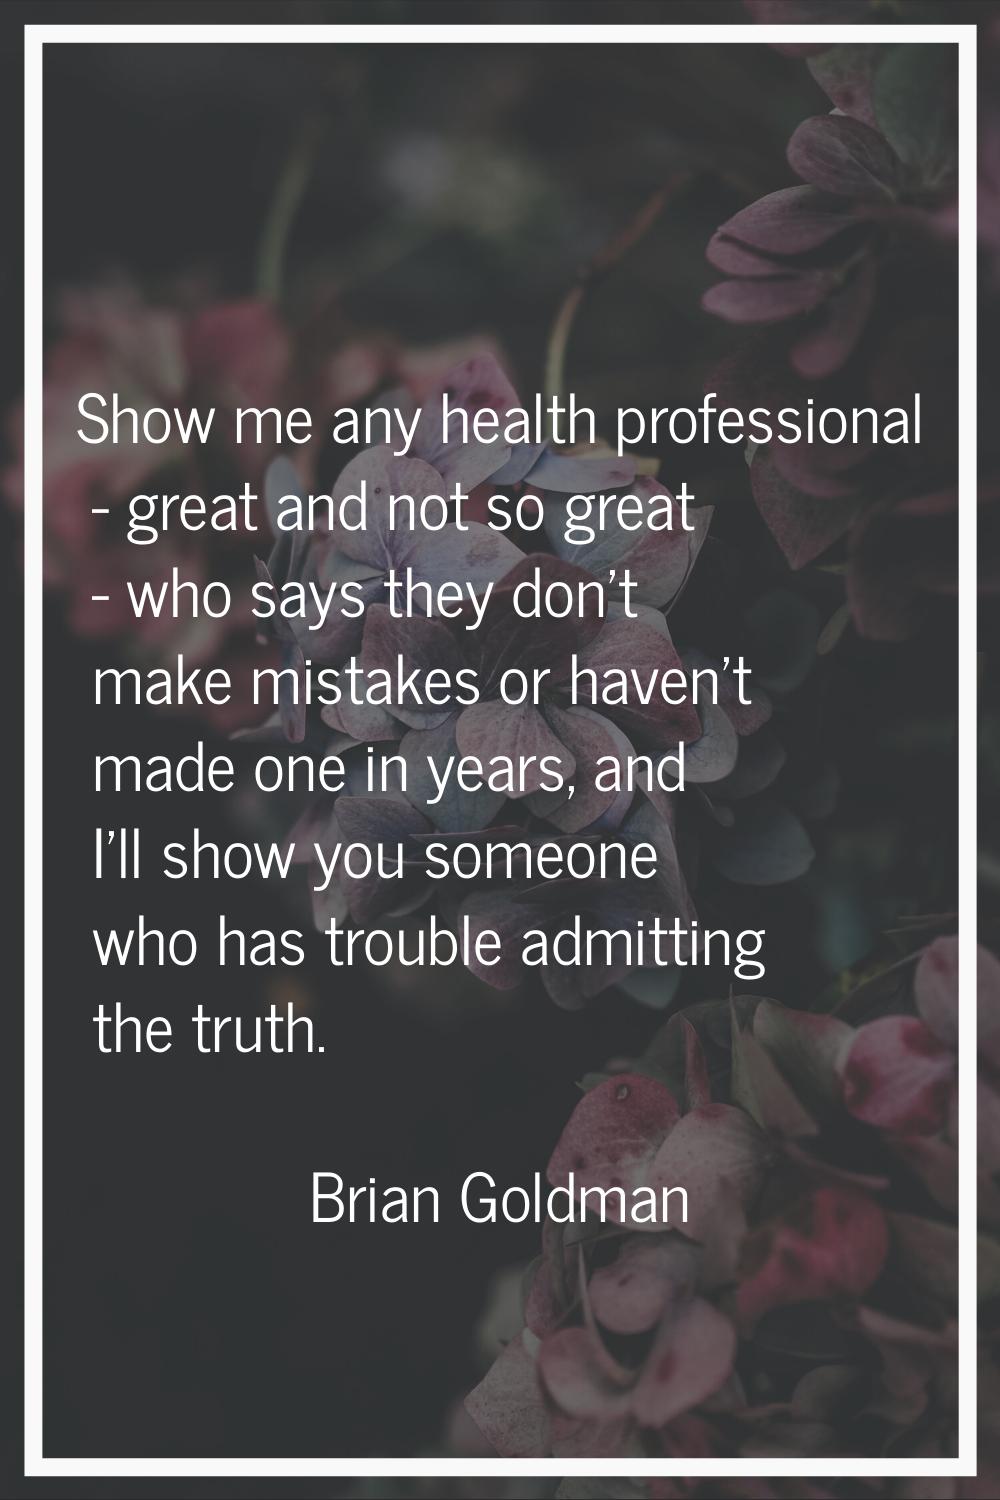 Show me any health professional - great and not so great - who says they don't make mistakes or hav